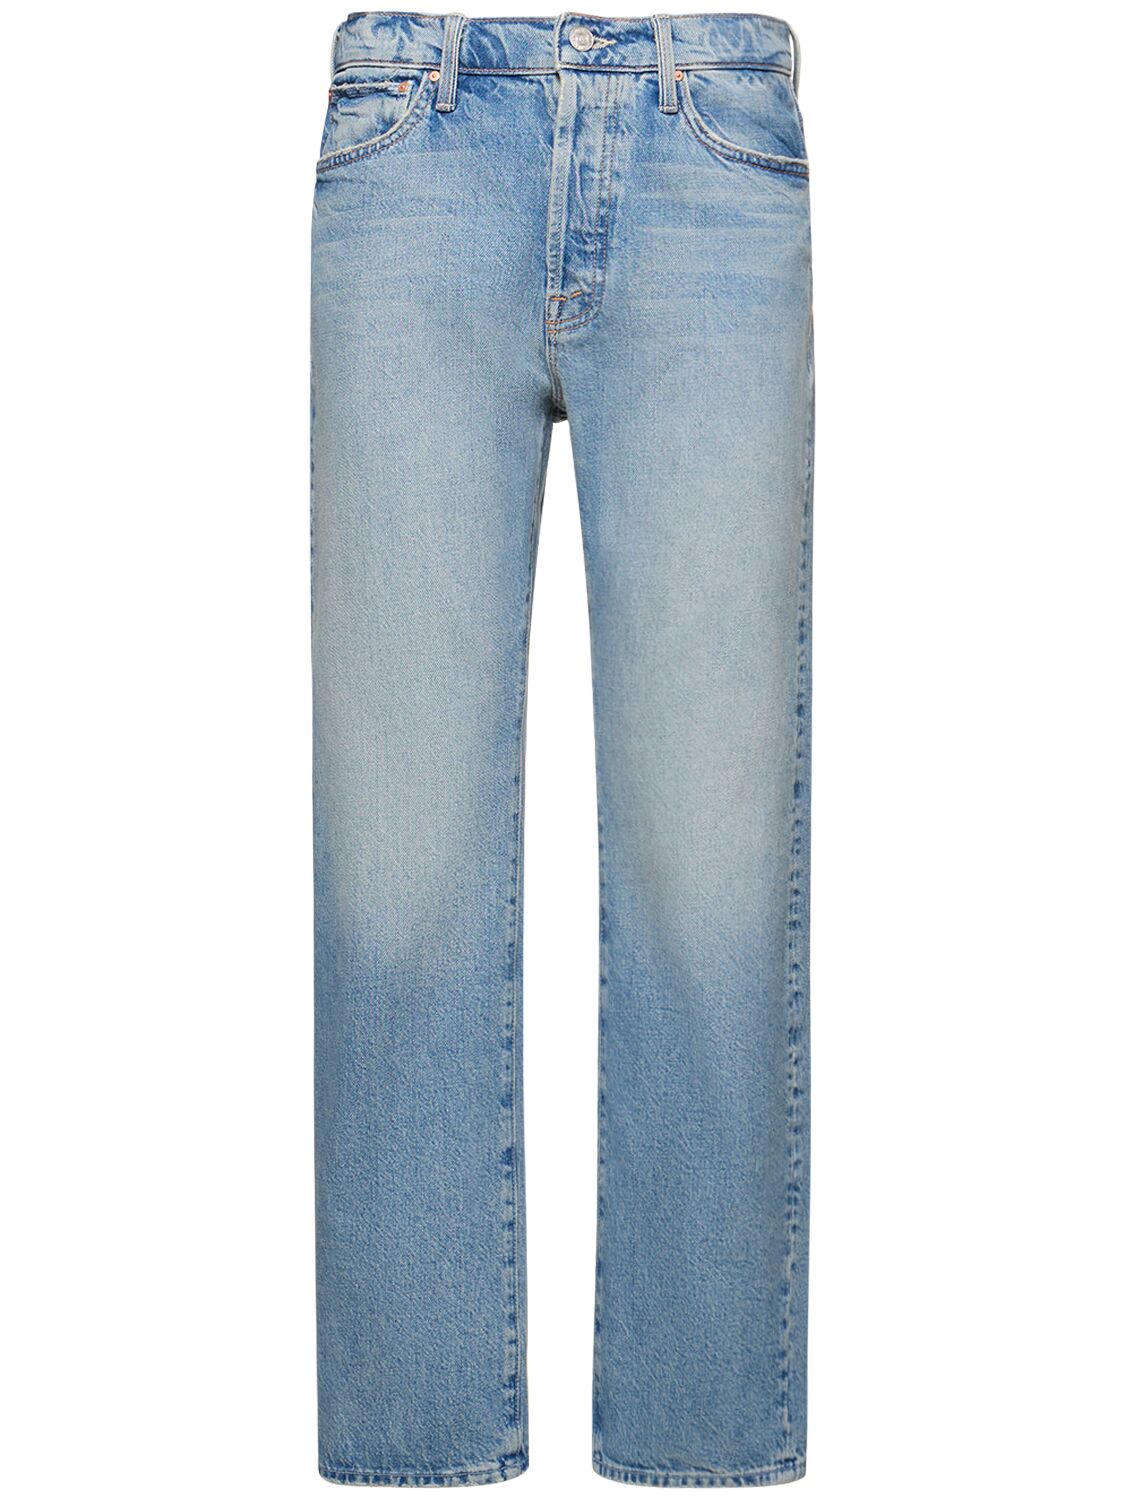 Image of The Ditcher Straight Cotton Jeans